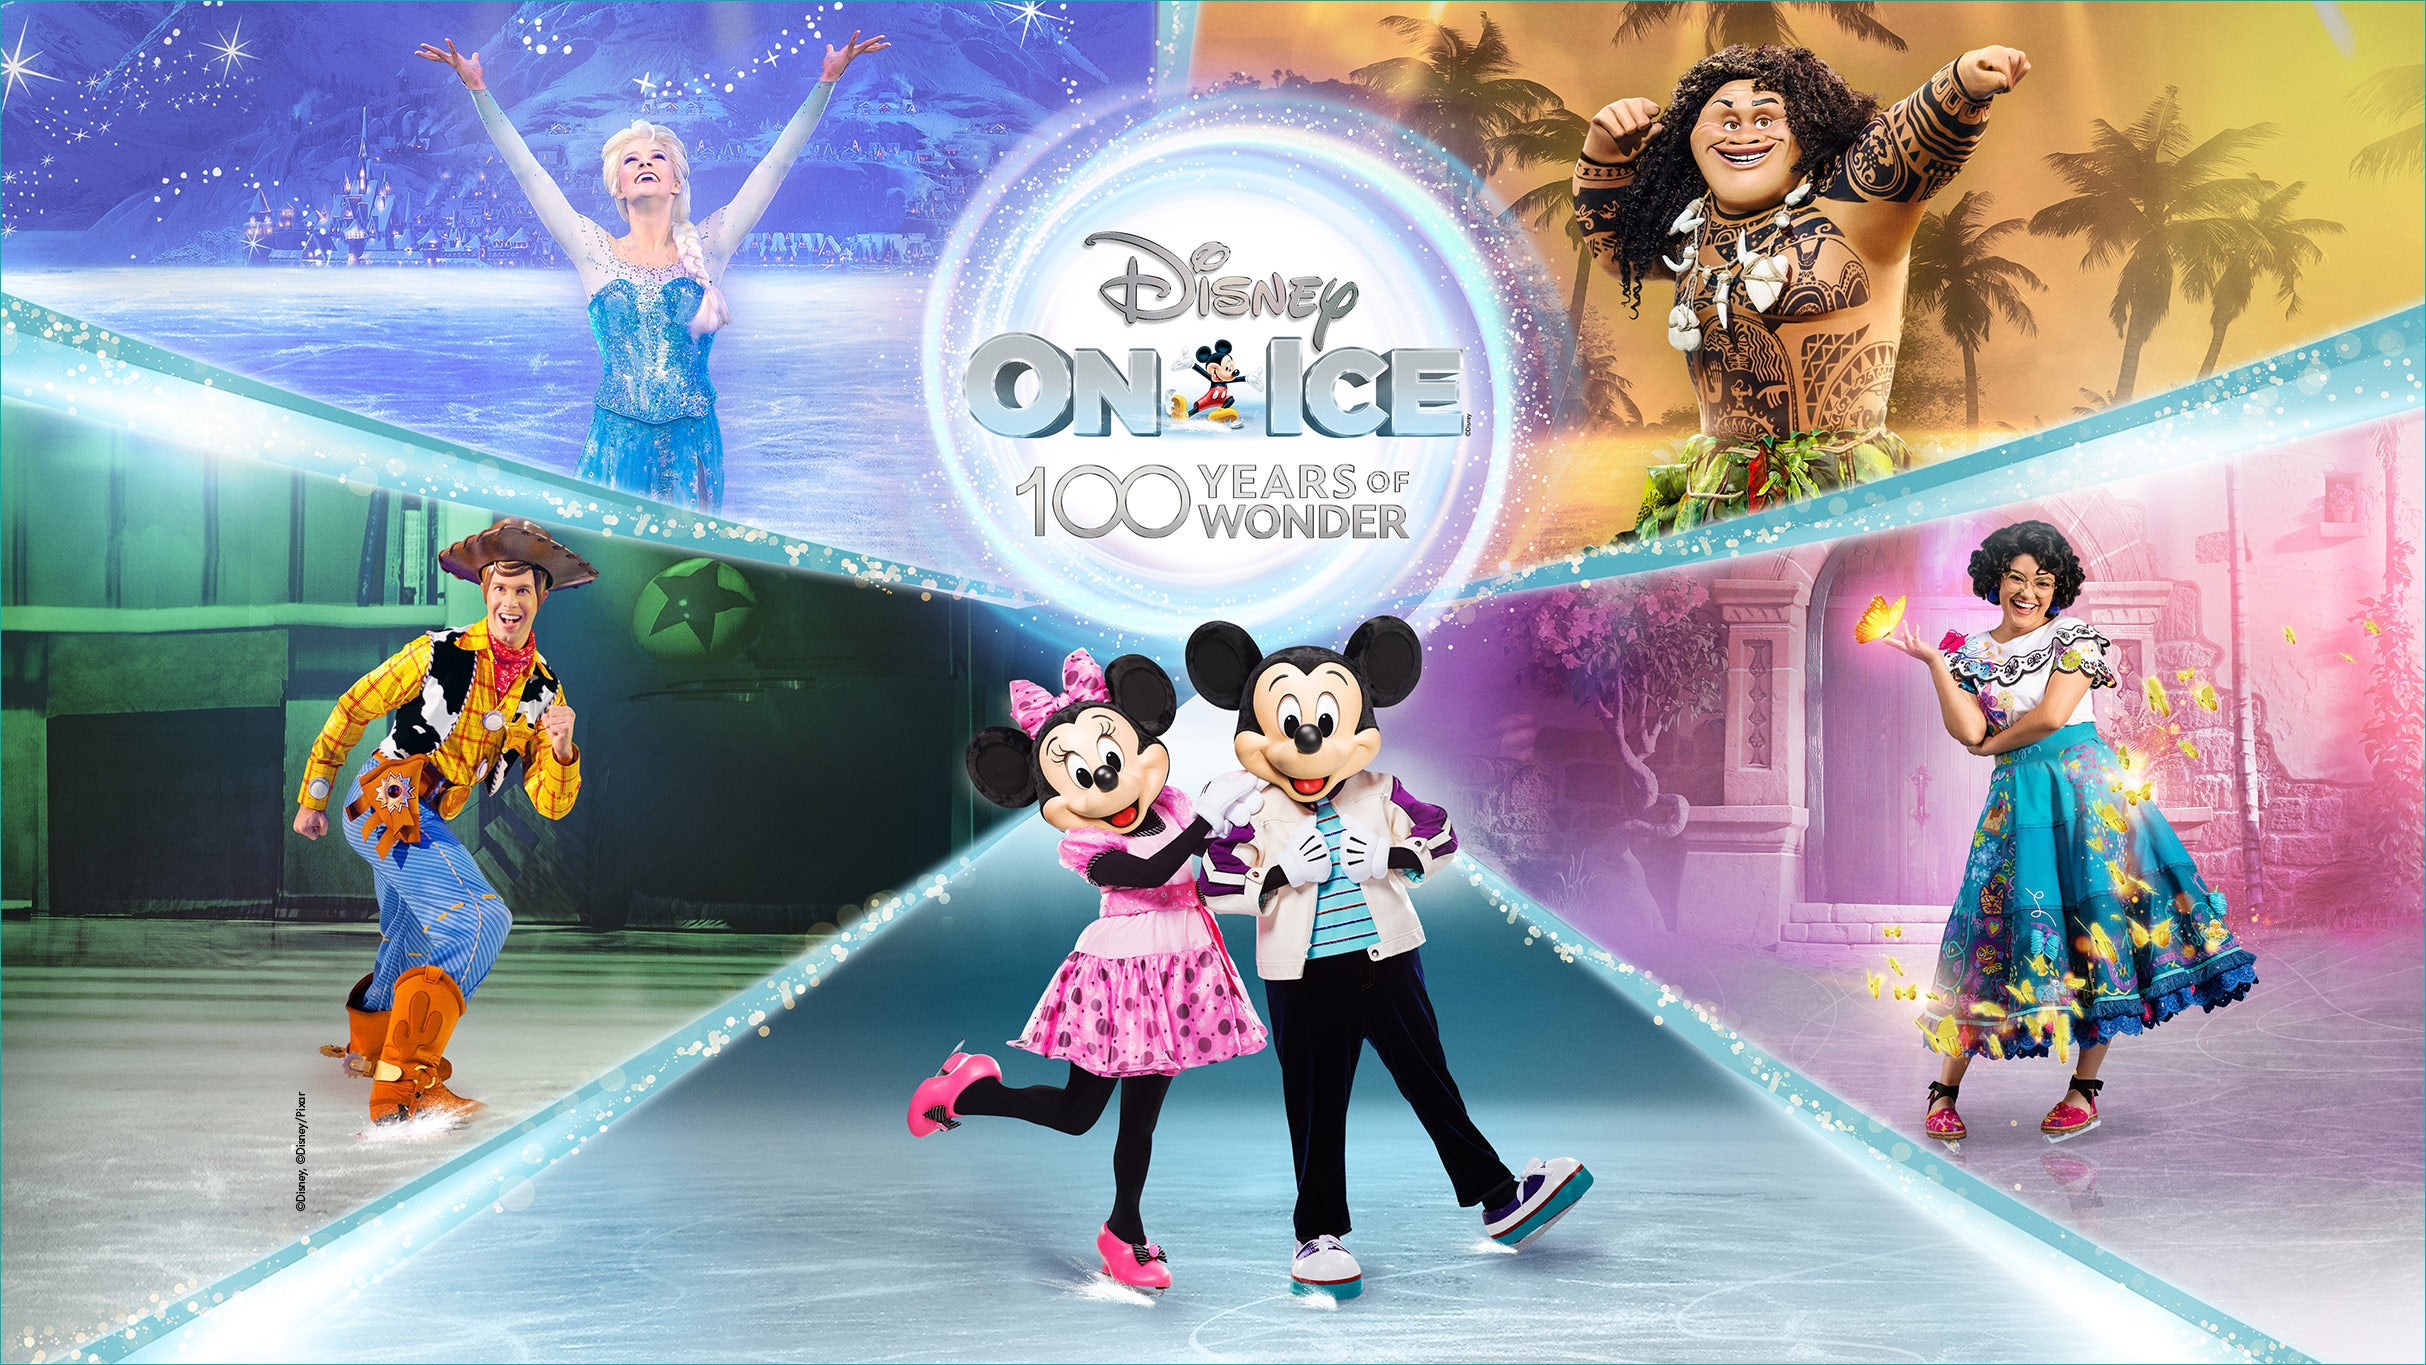 Disney on Ice presents 100 Years of Wonder in Newcastle Upon Tyne promo photo for Venue presale offer code